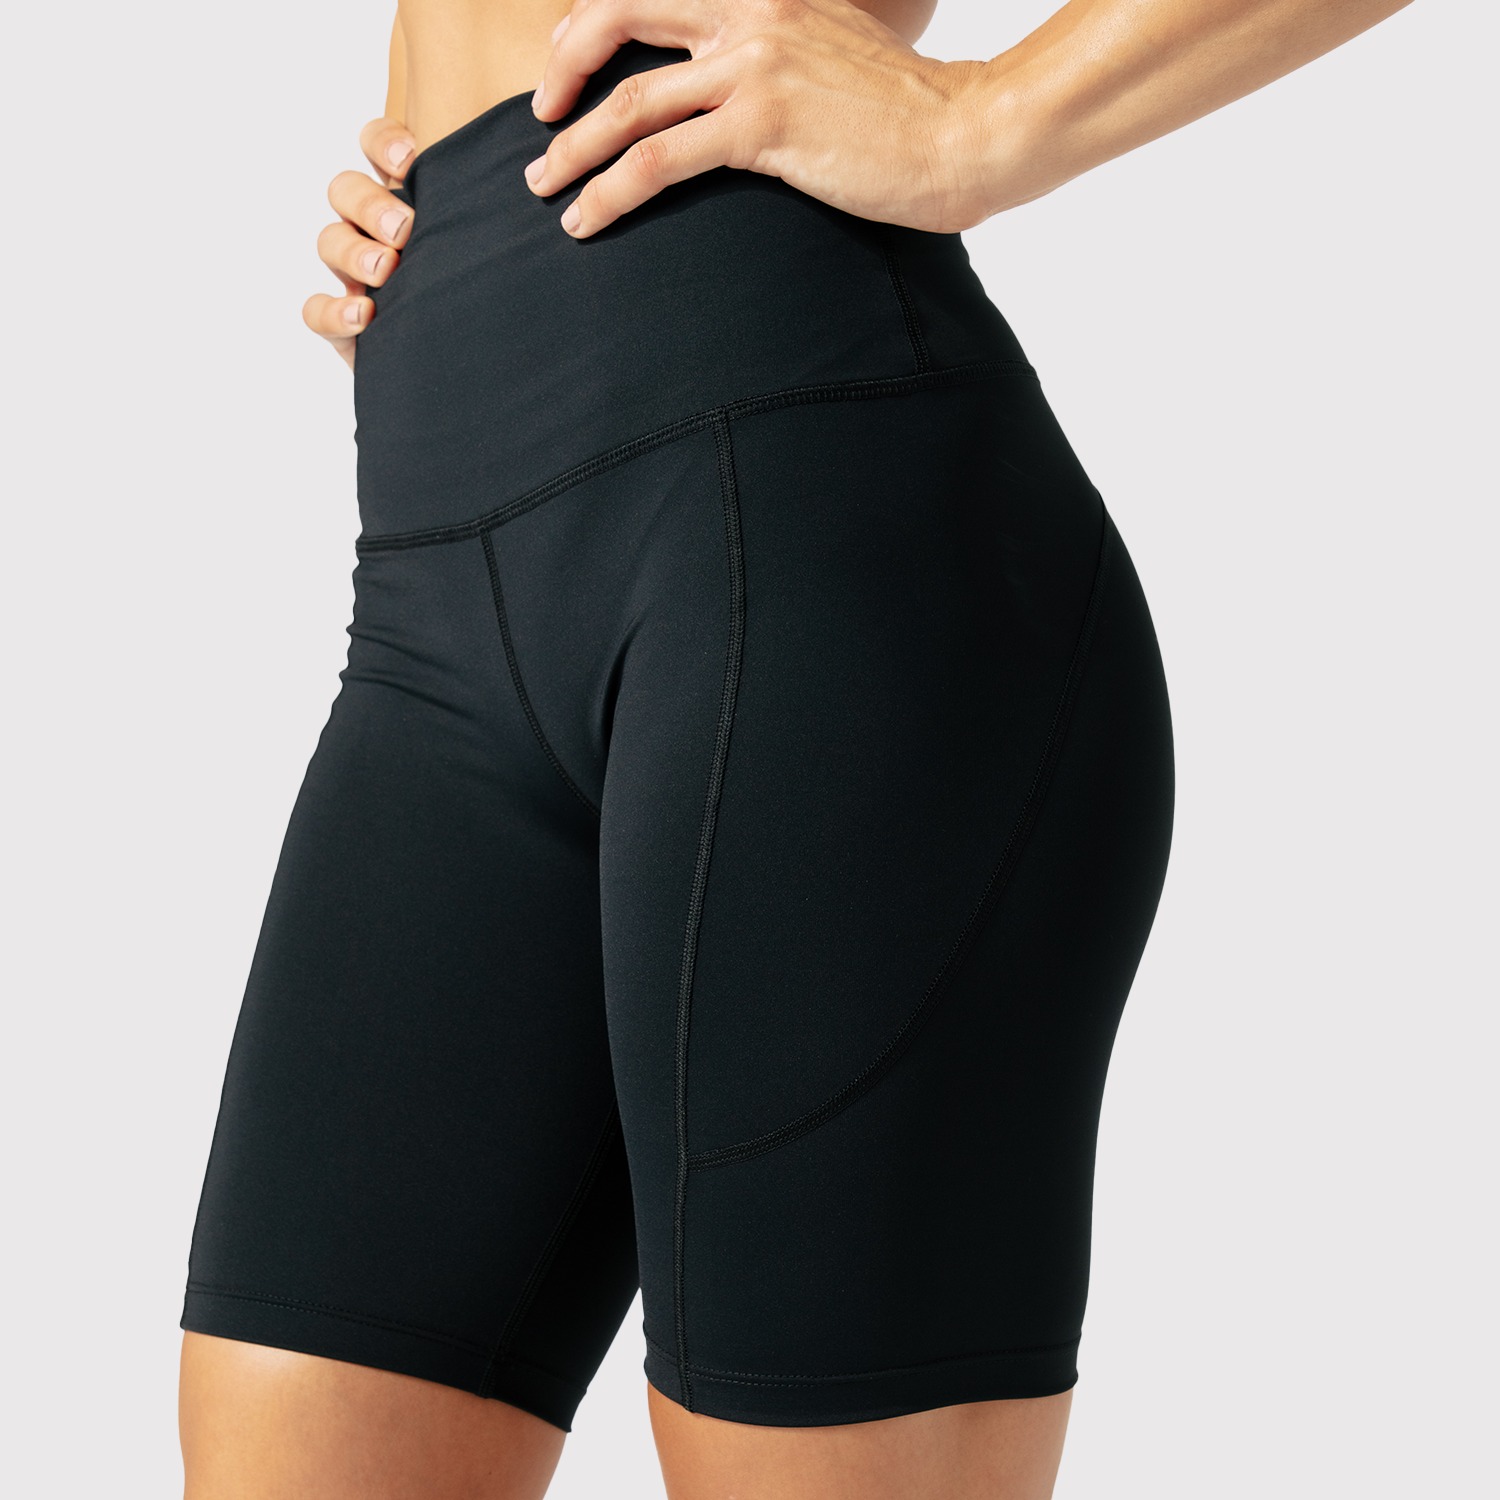 12 Best Female Compression Shorts For 2023